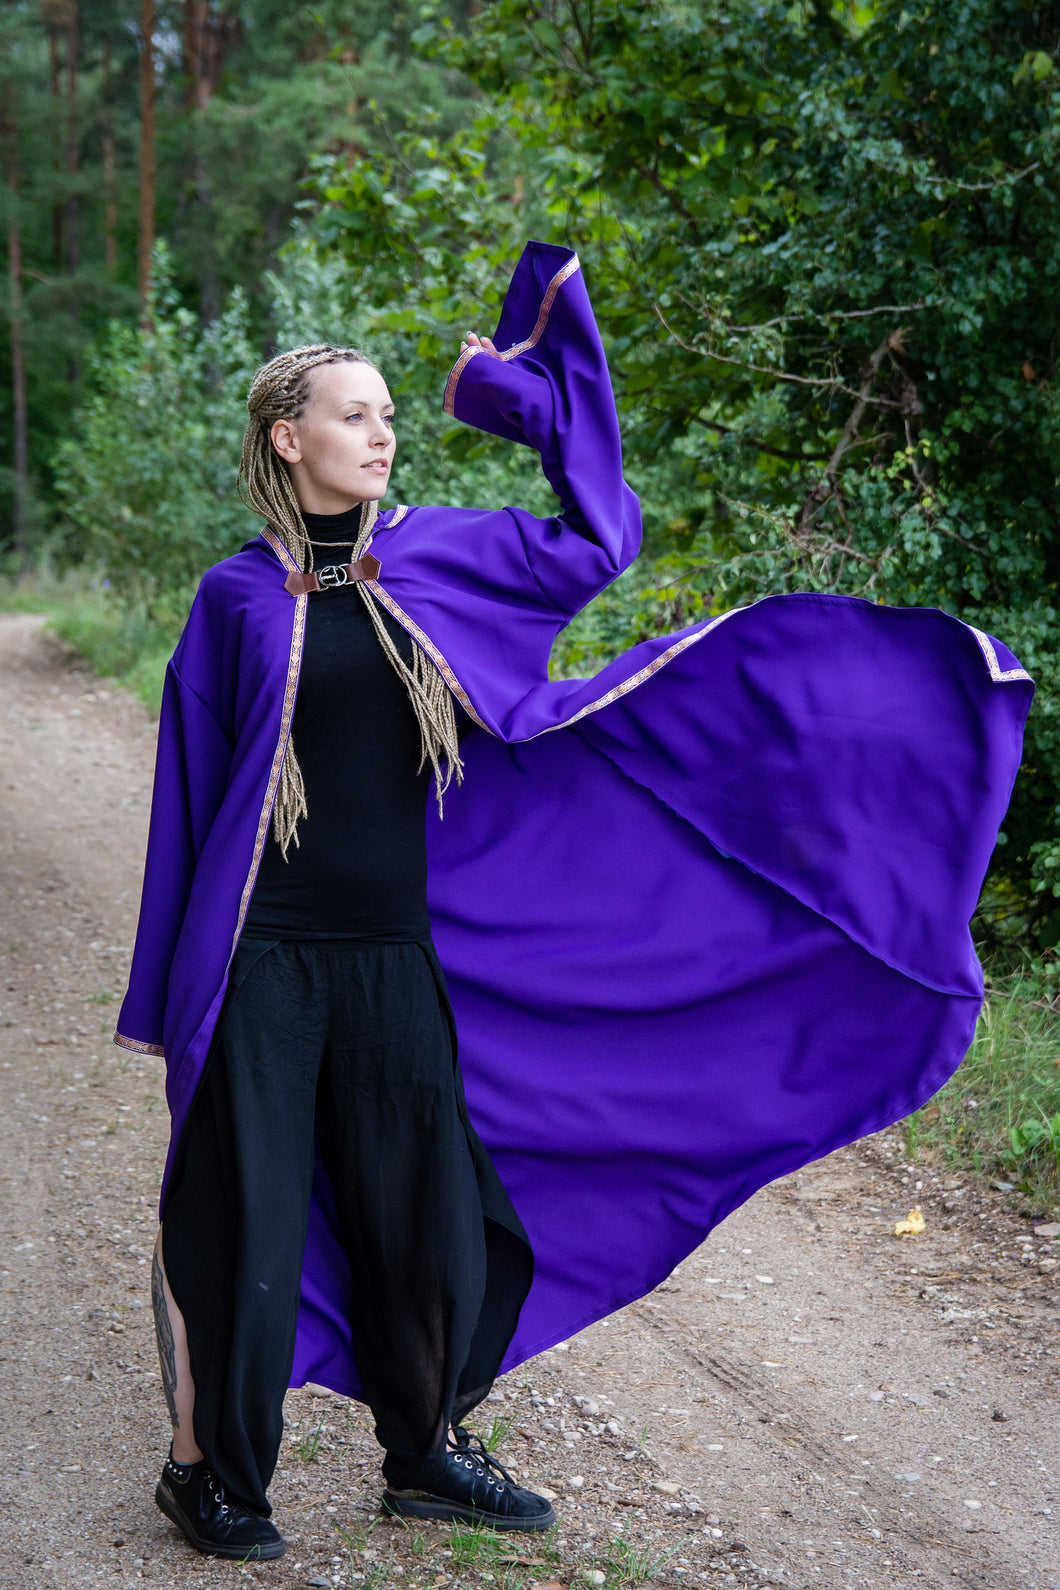 Wizard hooded mantle mage sleeved cloak sorcerer robe witch cosplay larp magician outfit